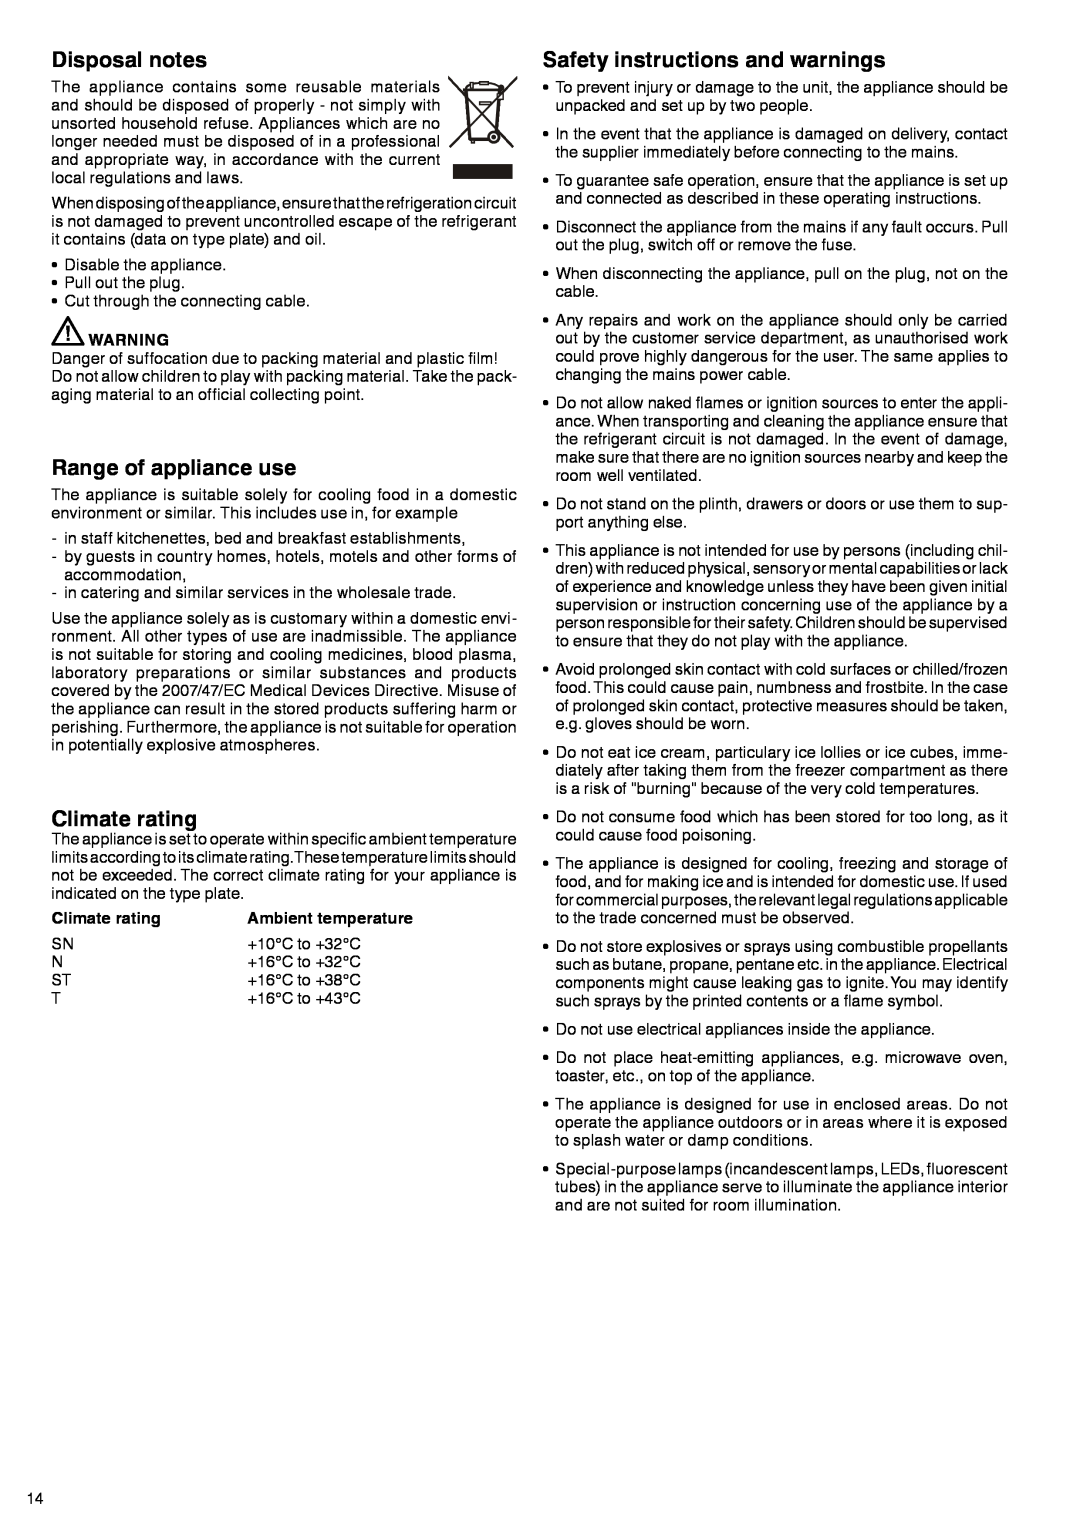 Liebherr 7082-499-00 manual Disposal notes, Range of appliance use, Climate rating, Safety instructions and warnings 